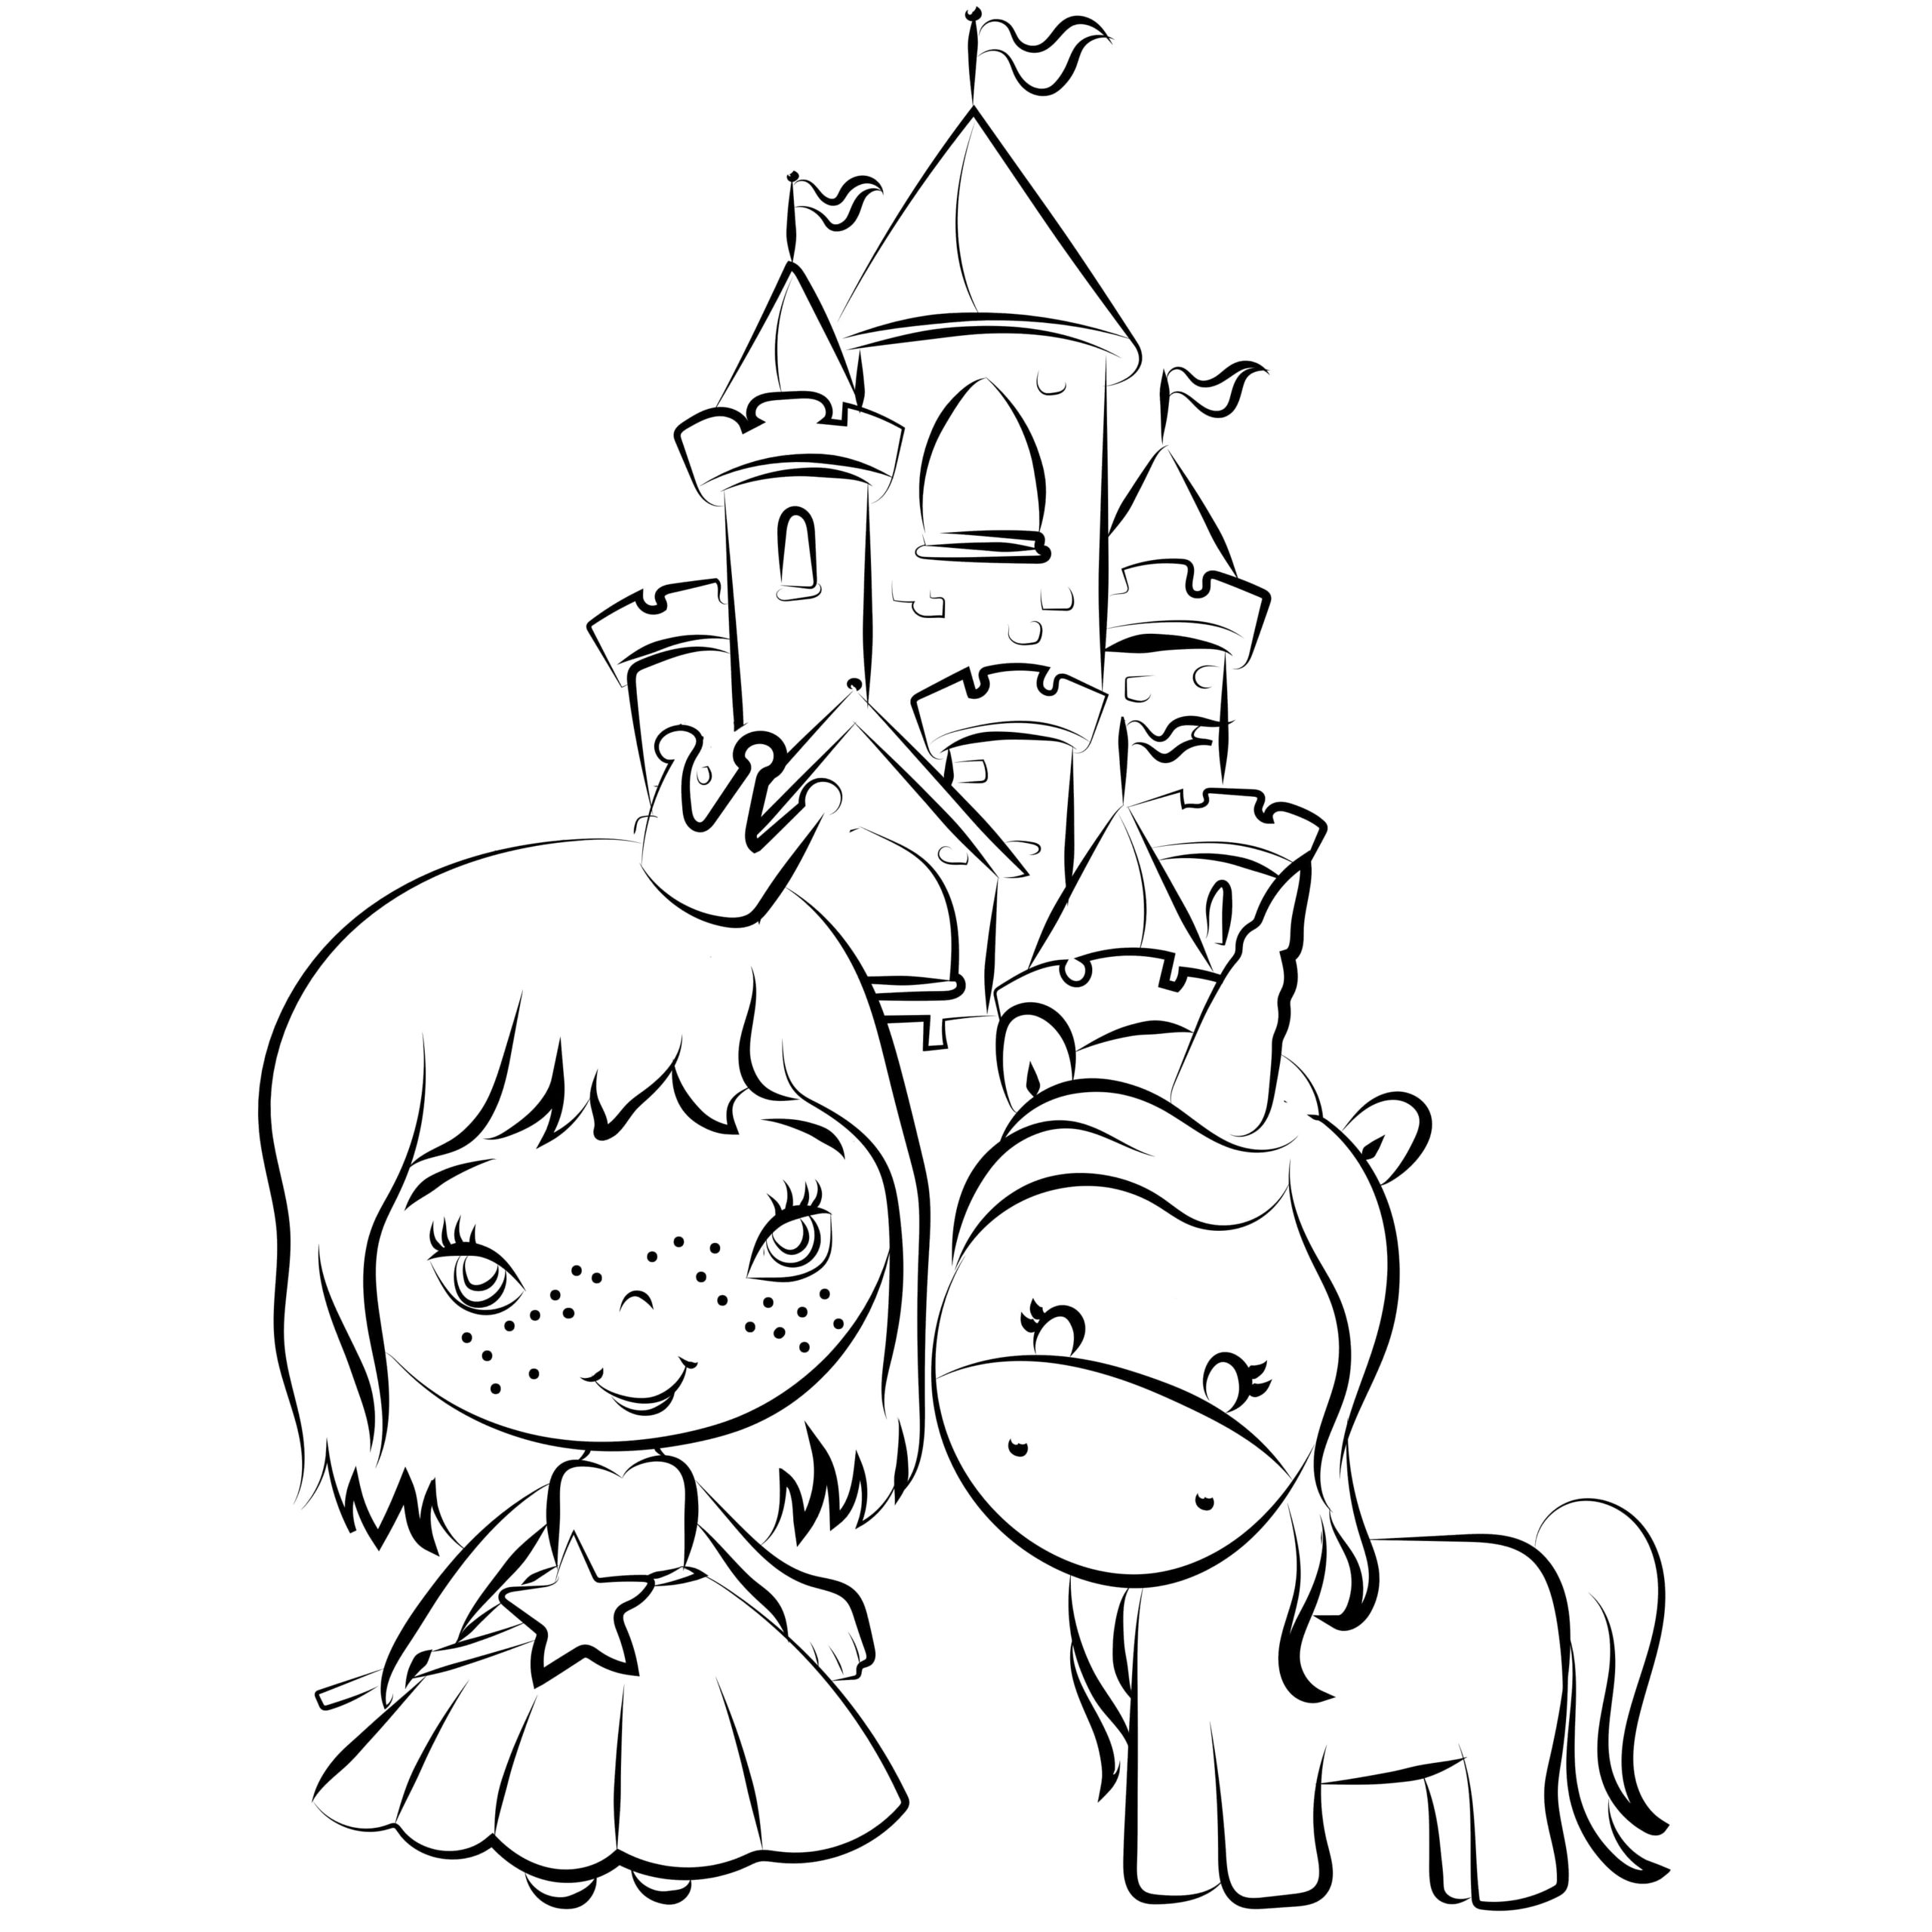 Unicorn and a little princess near the castle coloring page